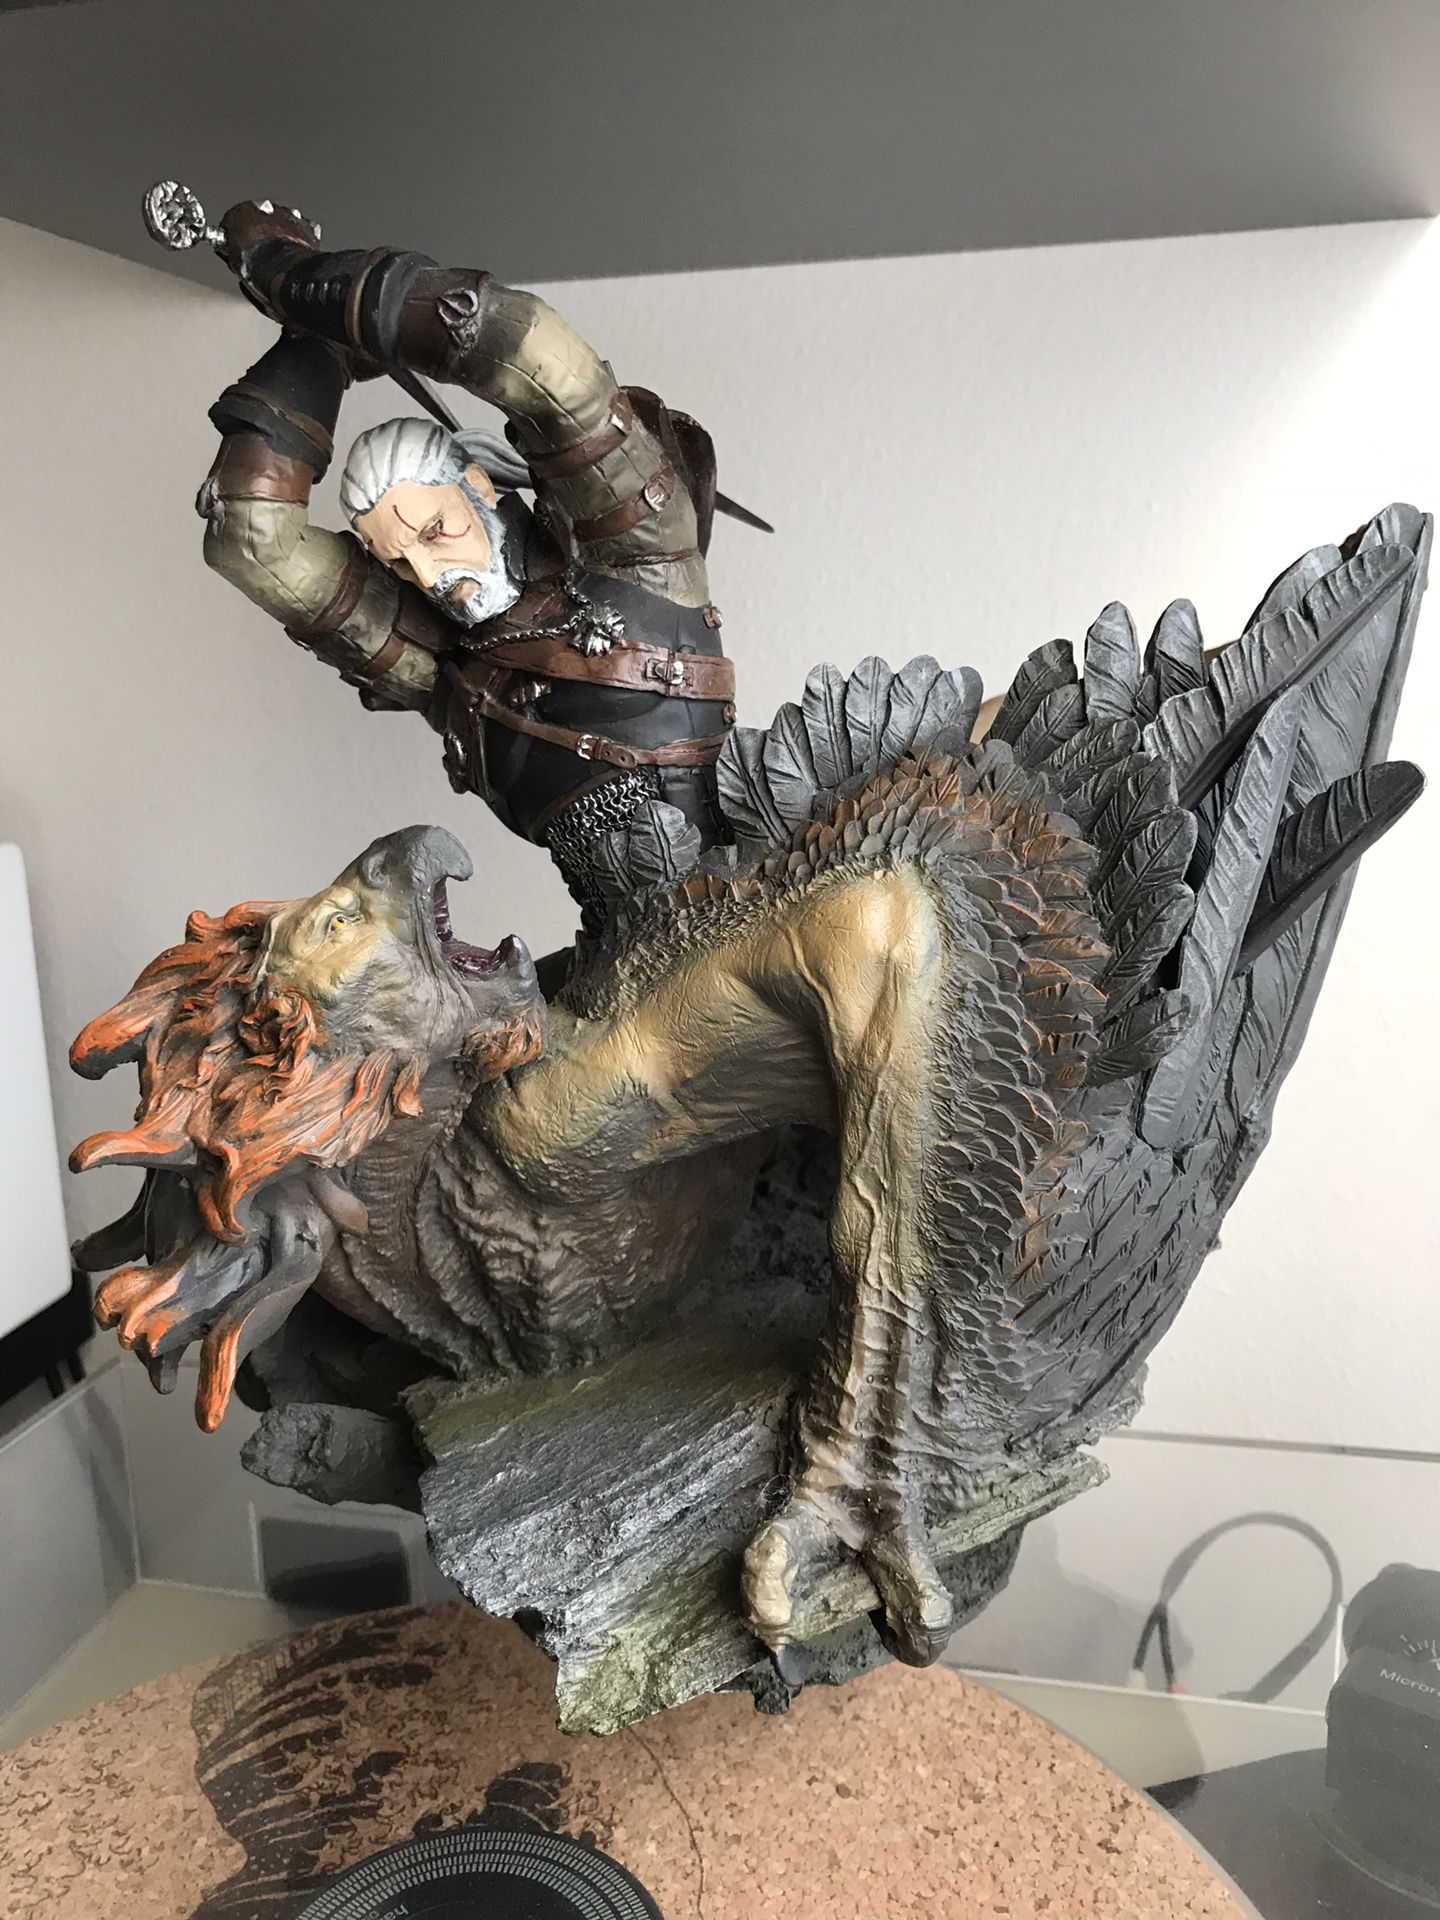 Limited Edition Witcher 3 statue: “Geralt Battling a Griffin”